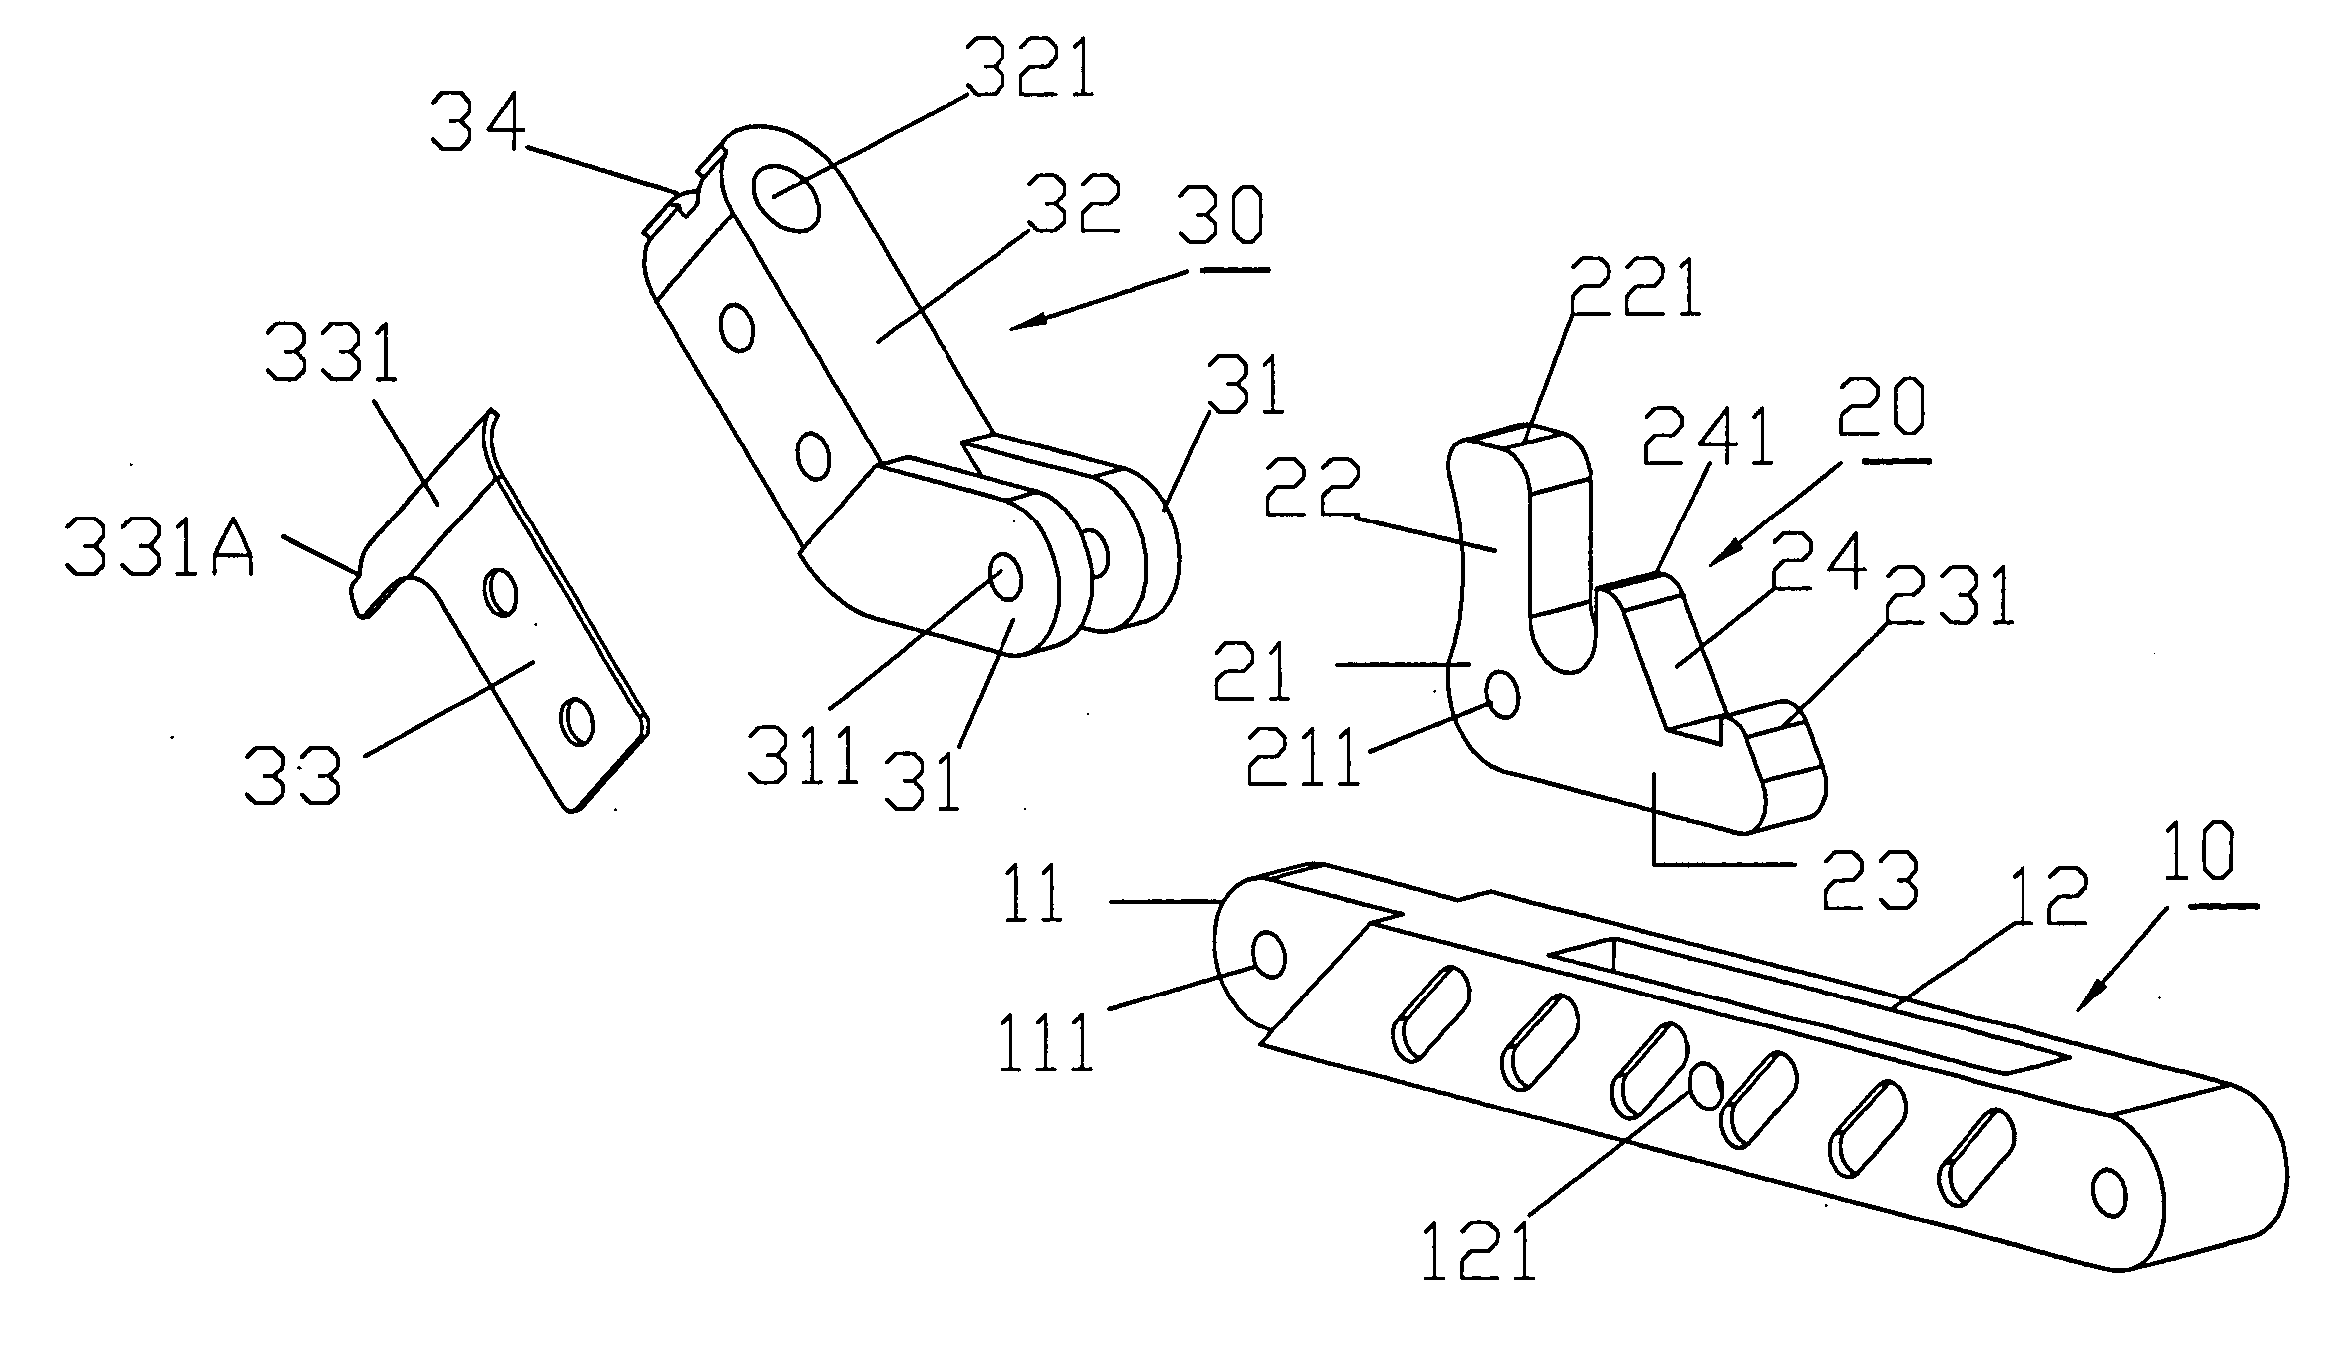 Wrench for an engine clutch of a radio control model